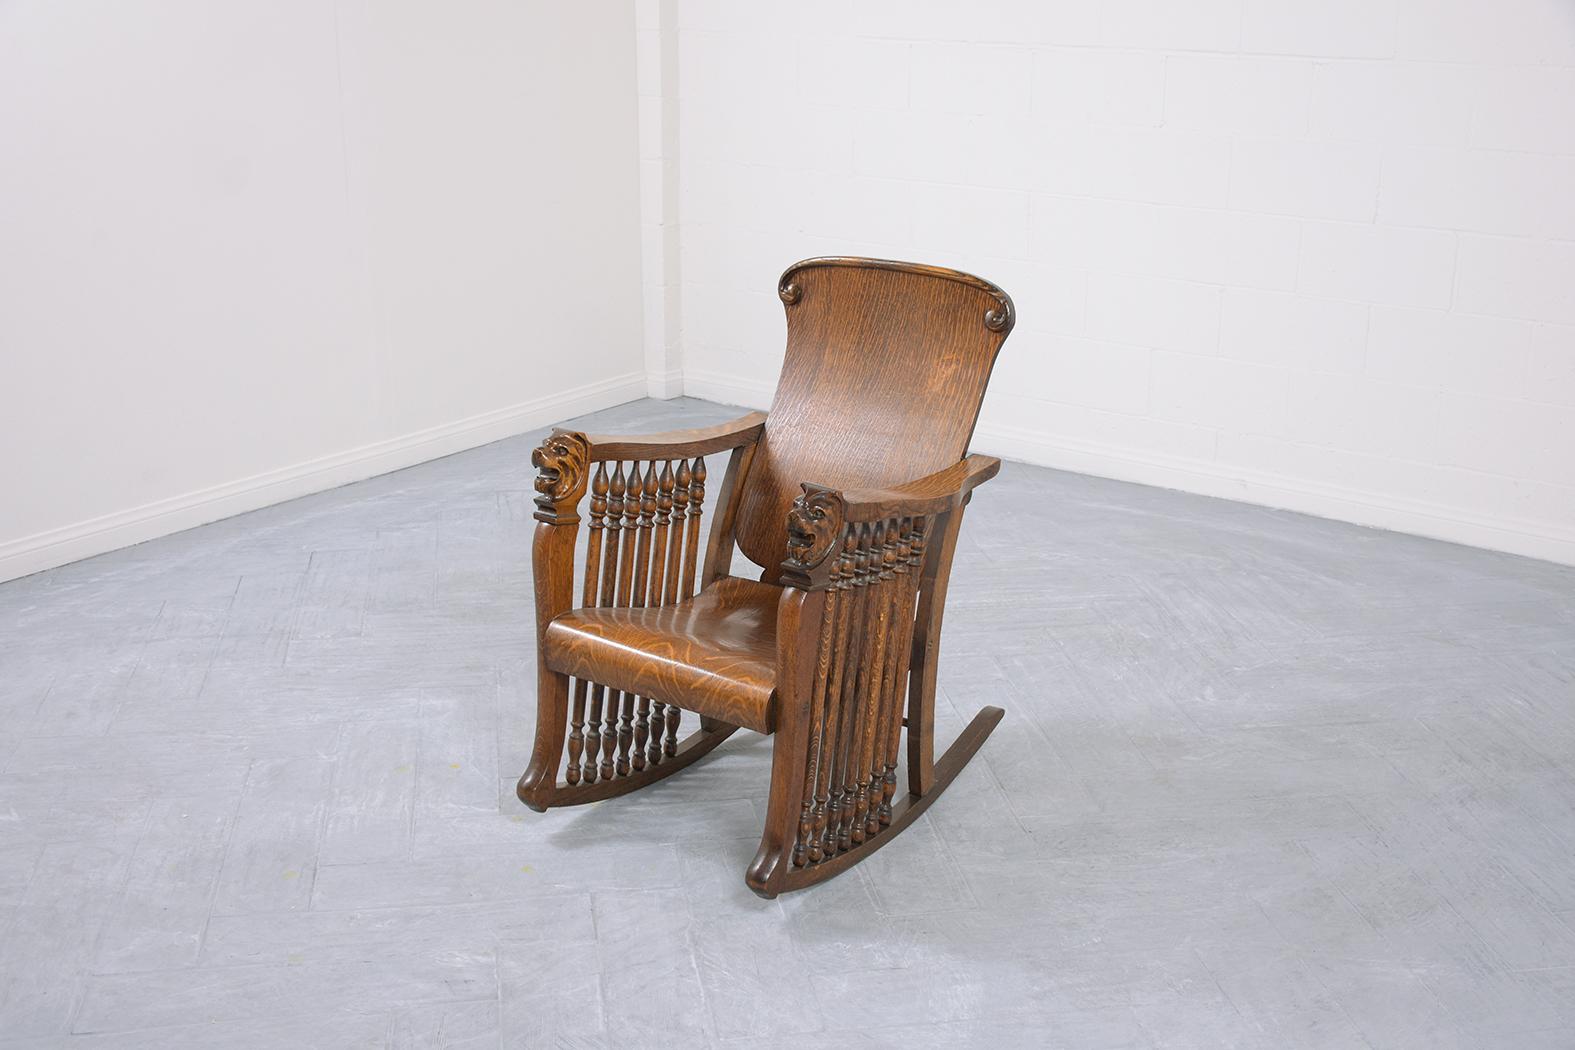 This extraordinary American Empire-style antique oak rocking chair is in great condition beautifully crafted out of oak and has been newly restored by our expert craftsmen team. This antique chair is eye-catching and features intricately hand-carved